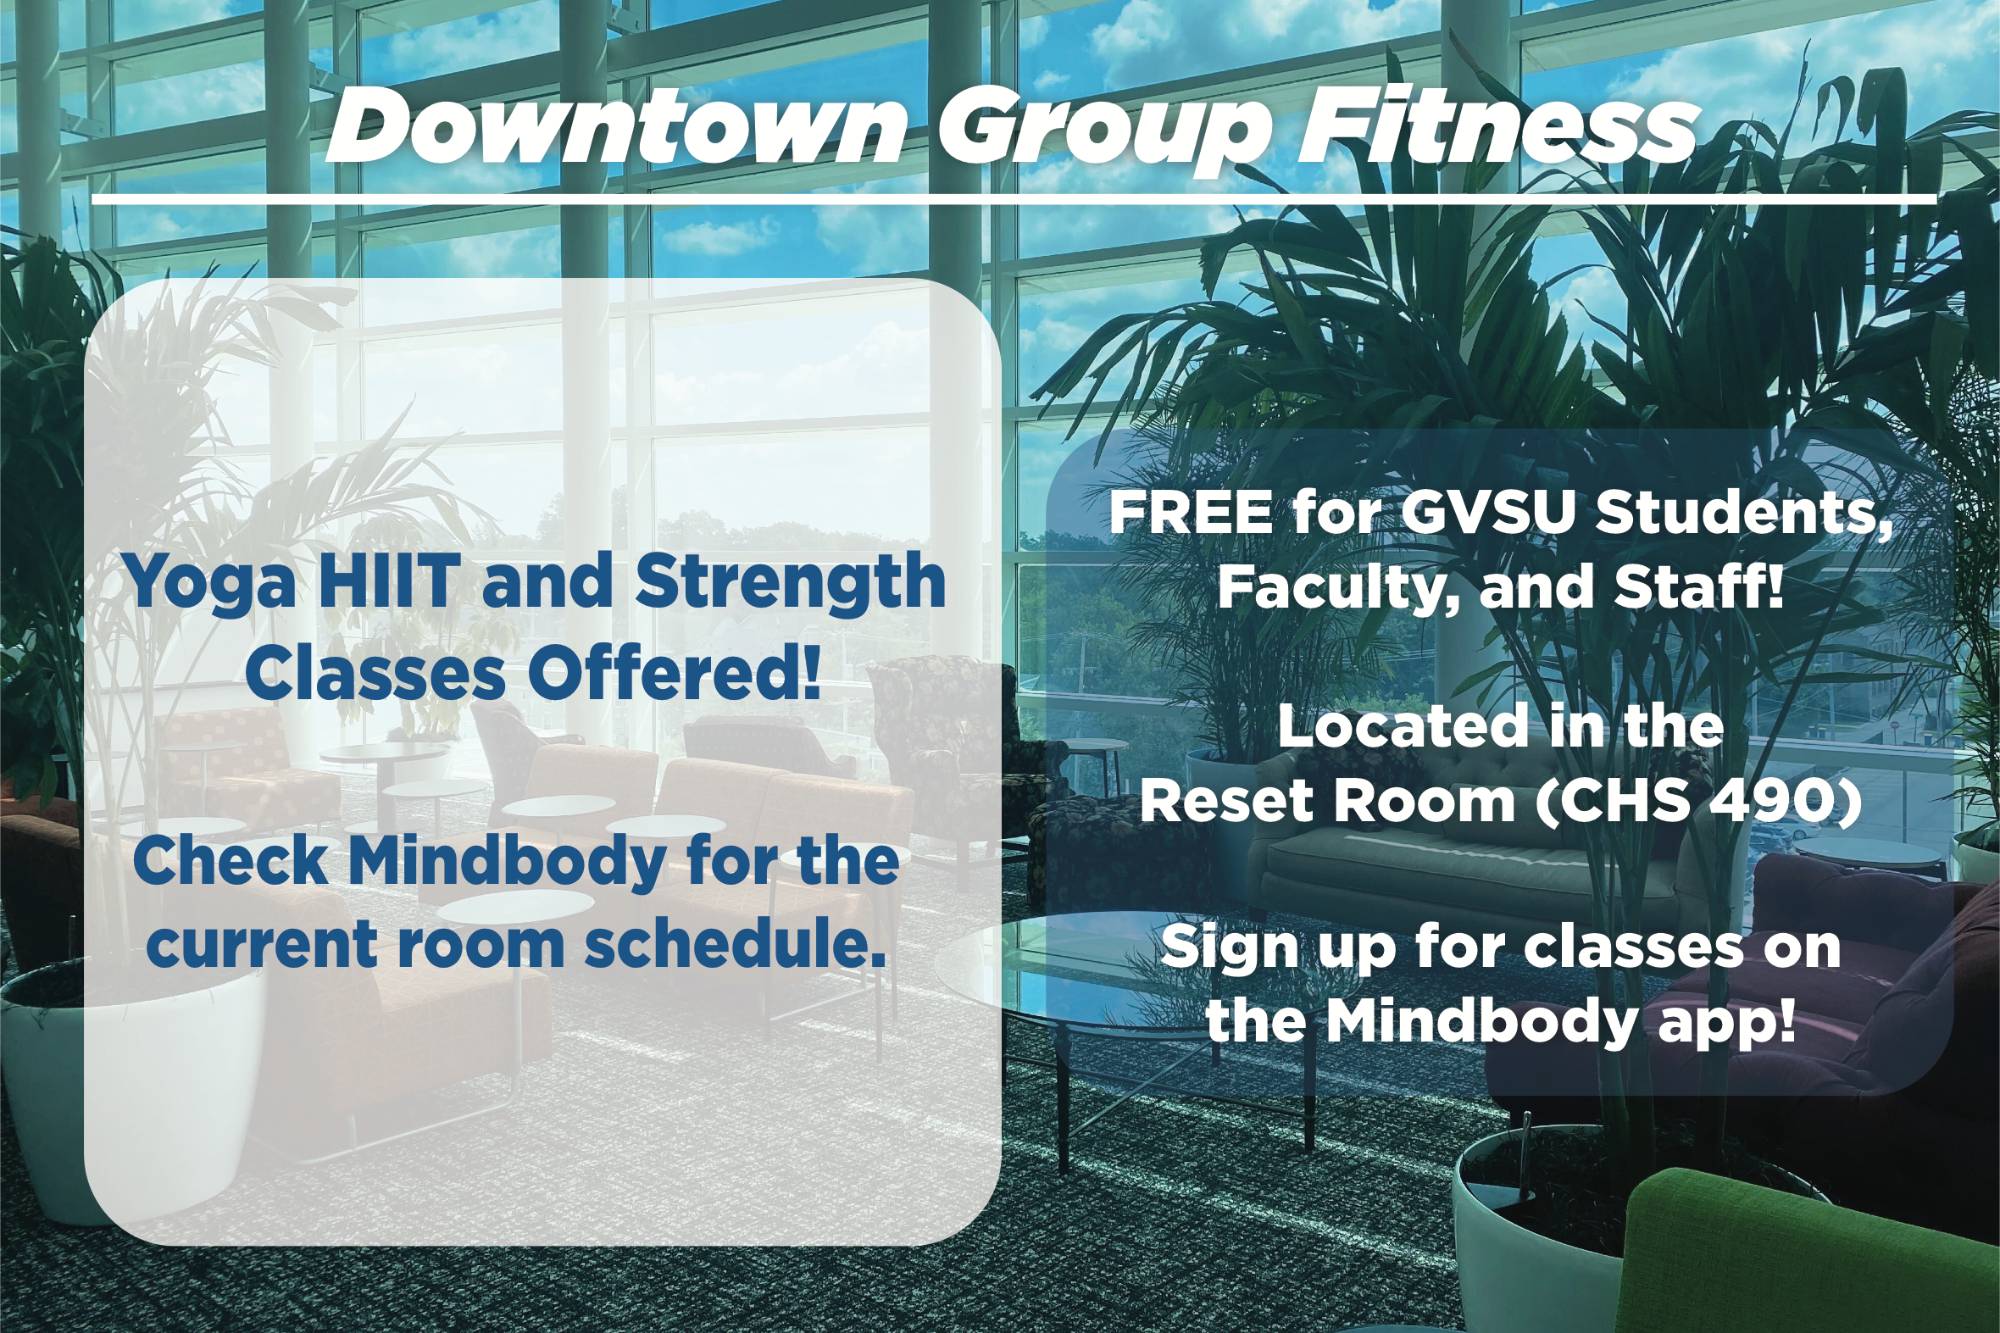 Downtown Group Fitness Classes